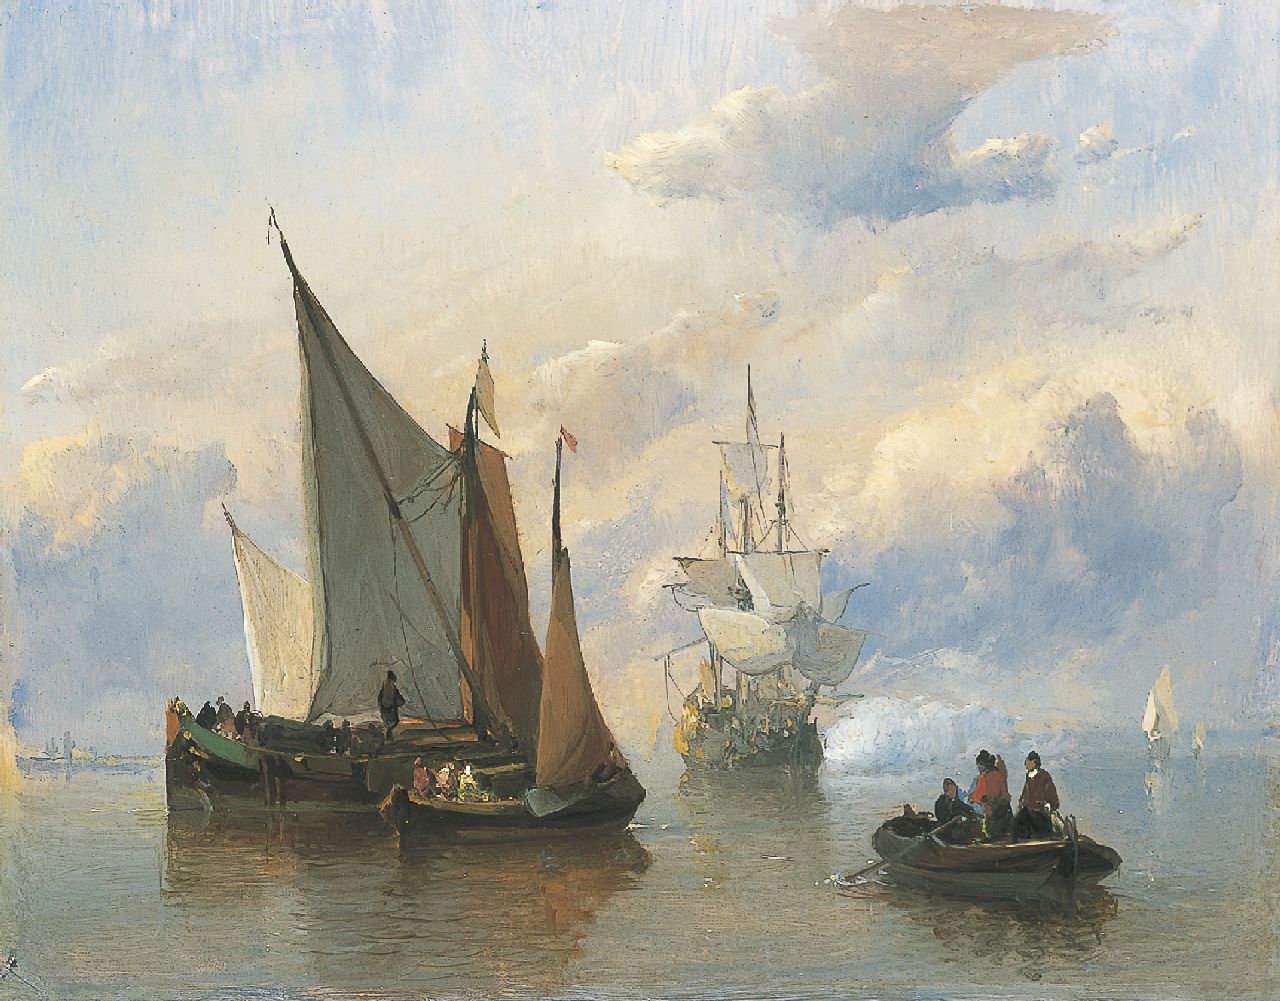 Koster E.  | Everhardus Koster, Sailing vessels and a three-master in a calm, oil on panel 19.2 x 24.6 cm